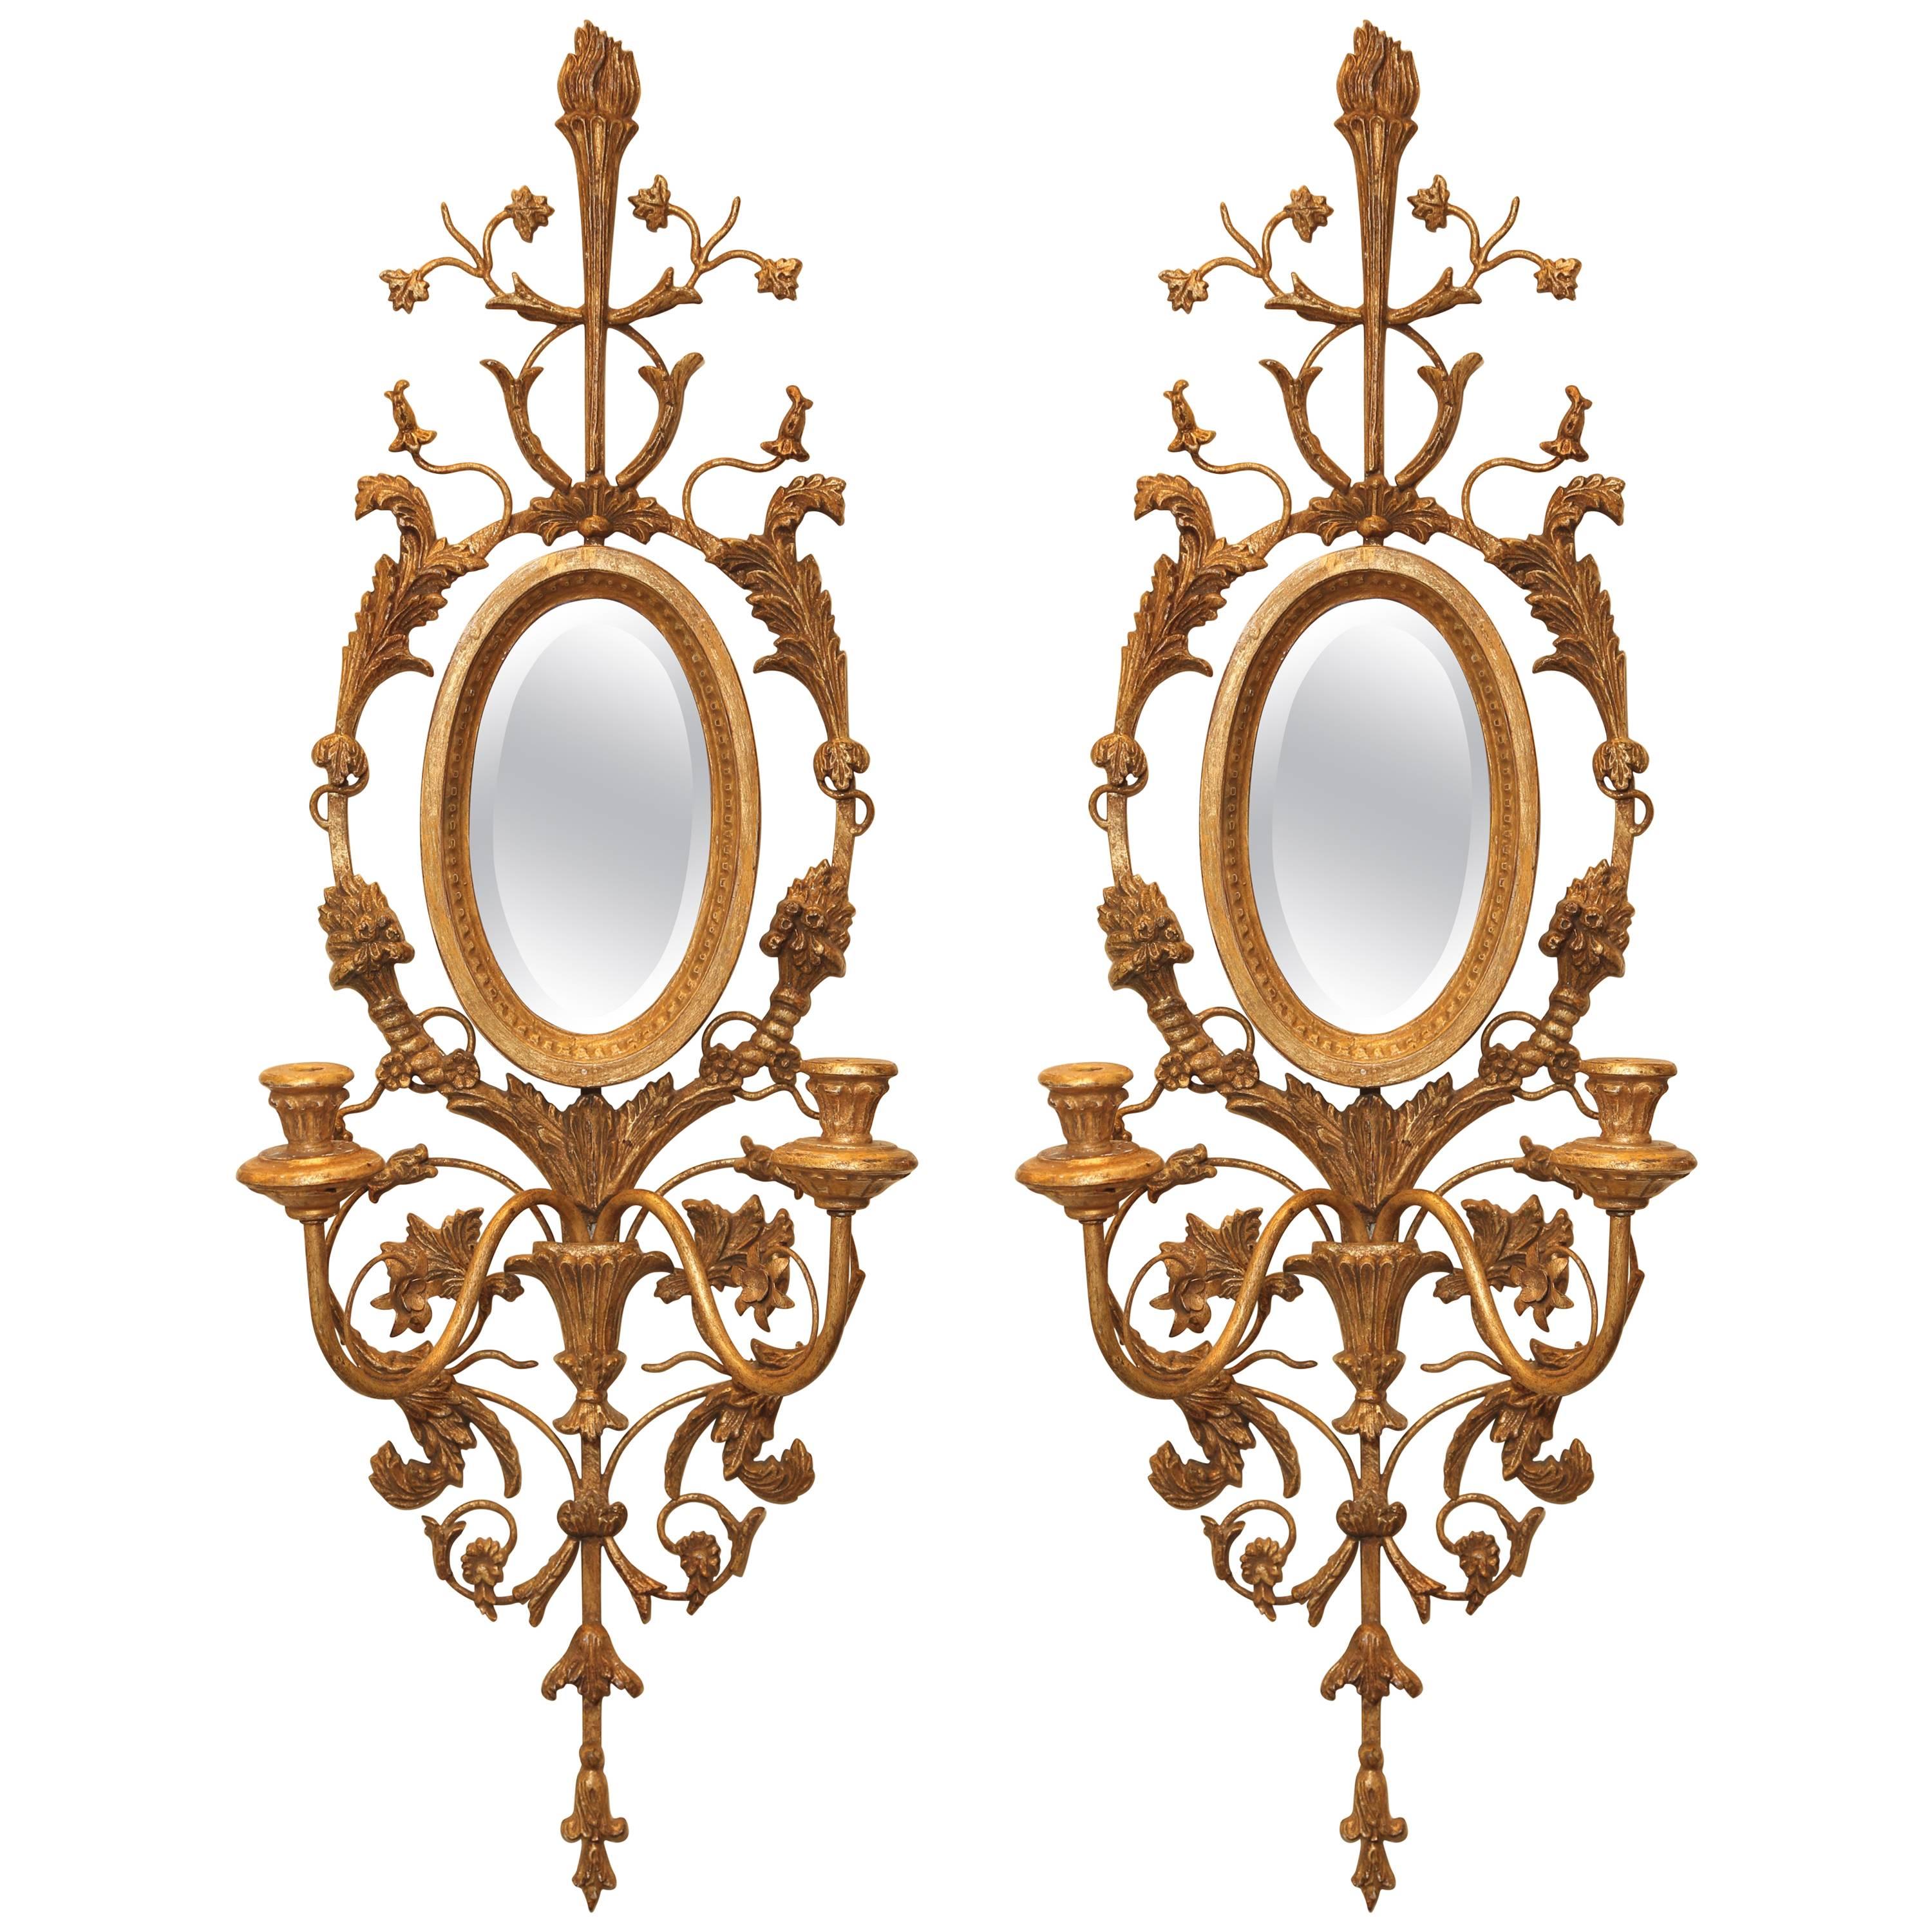 Pair of Italian Gilded Iron and Wood Foliate Sconces with Mirror Backplate